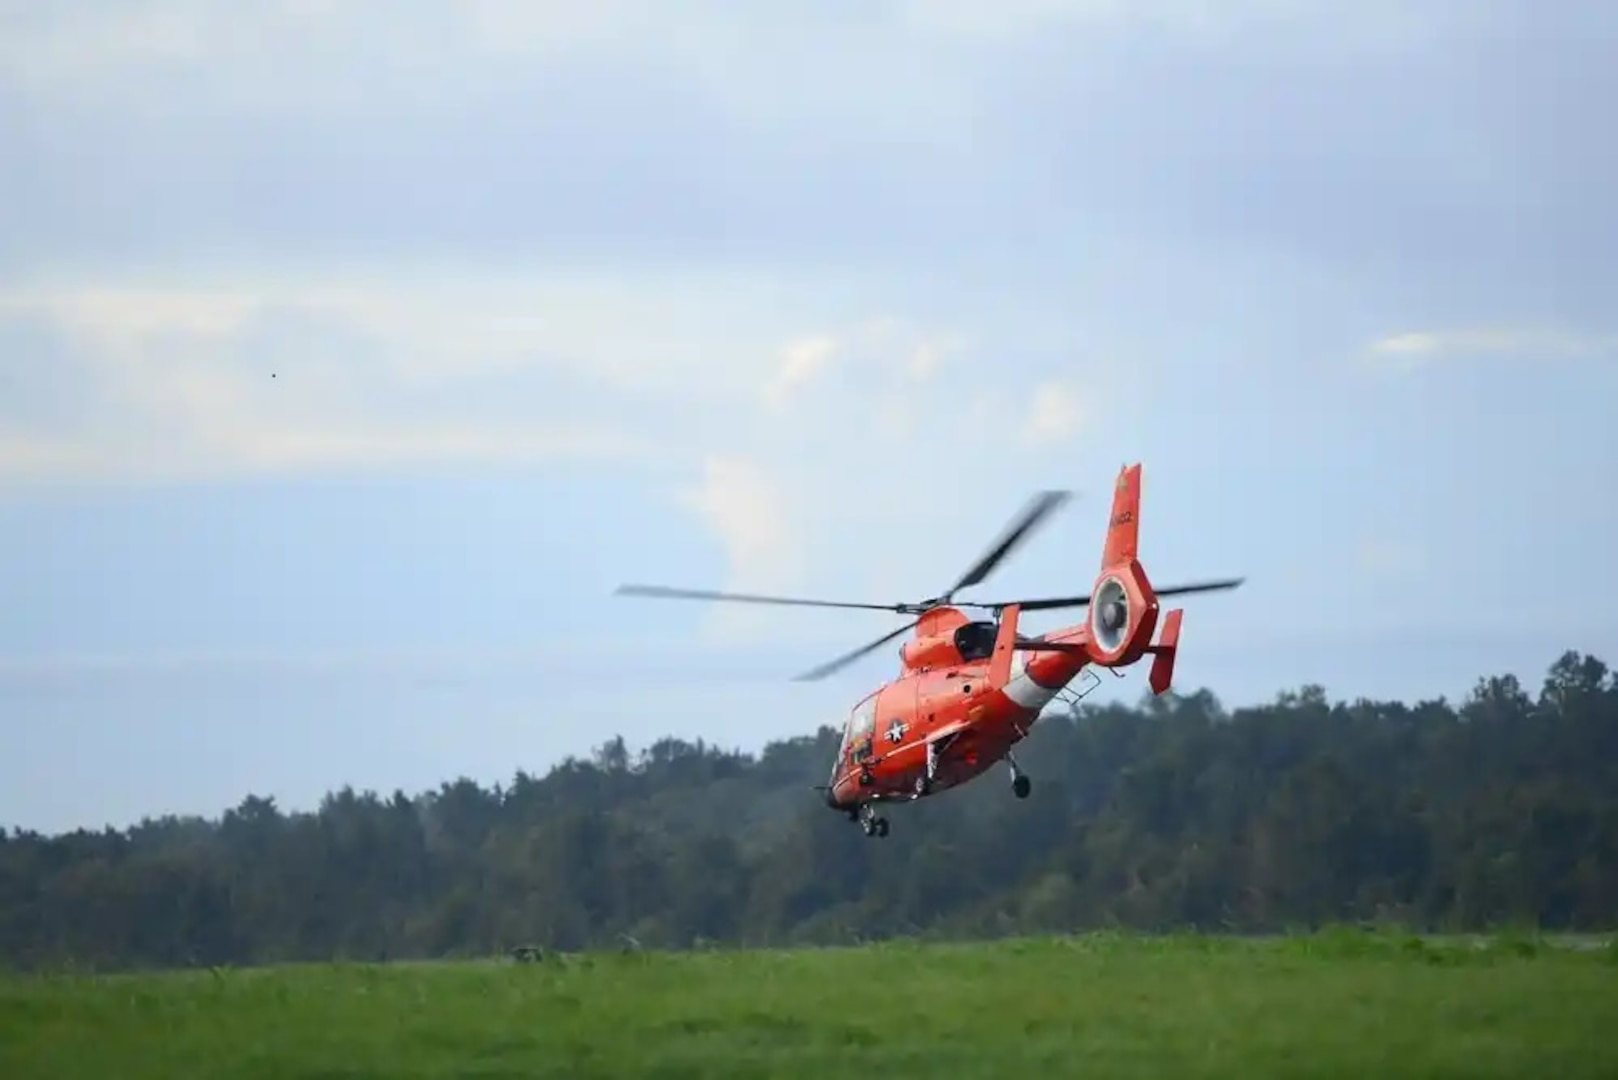 The Coast Guard launched assets in response to Hurricane Nate in New Orleans, October 8, 2017. Coast Guard Air Station New Orleans MH-65 Dolphin helicopter aircrews launched to complete Hurricane Nate damage assessment flights Sunday morning. (U.S. Coast Guard photo by Petty Officer 3rd Class Brandon Giles)